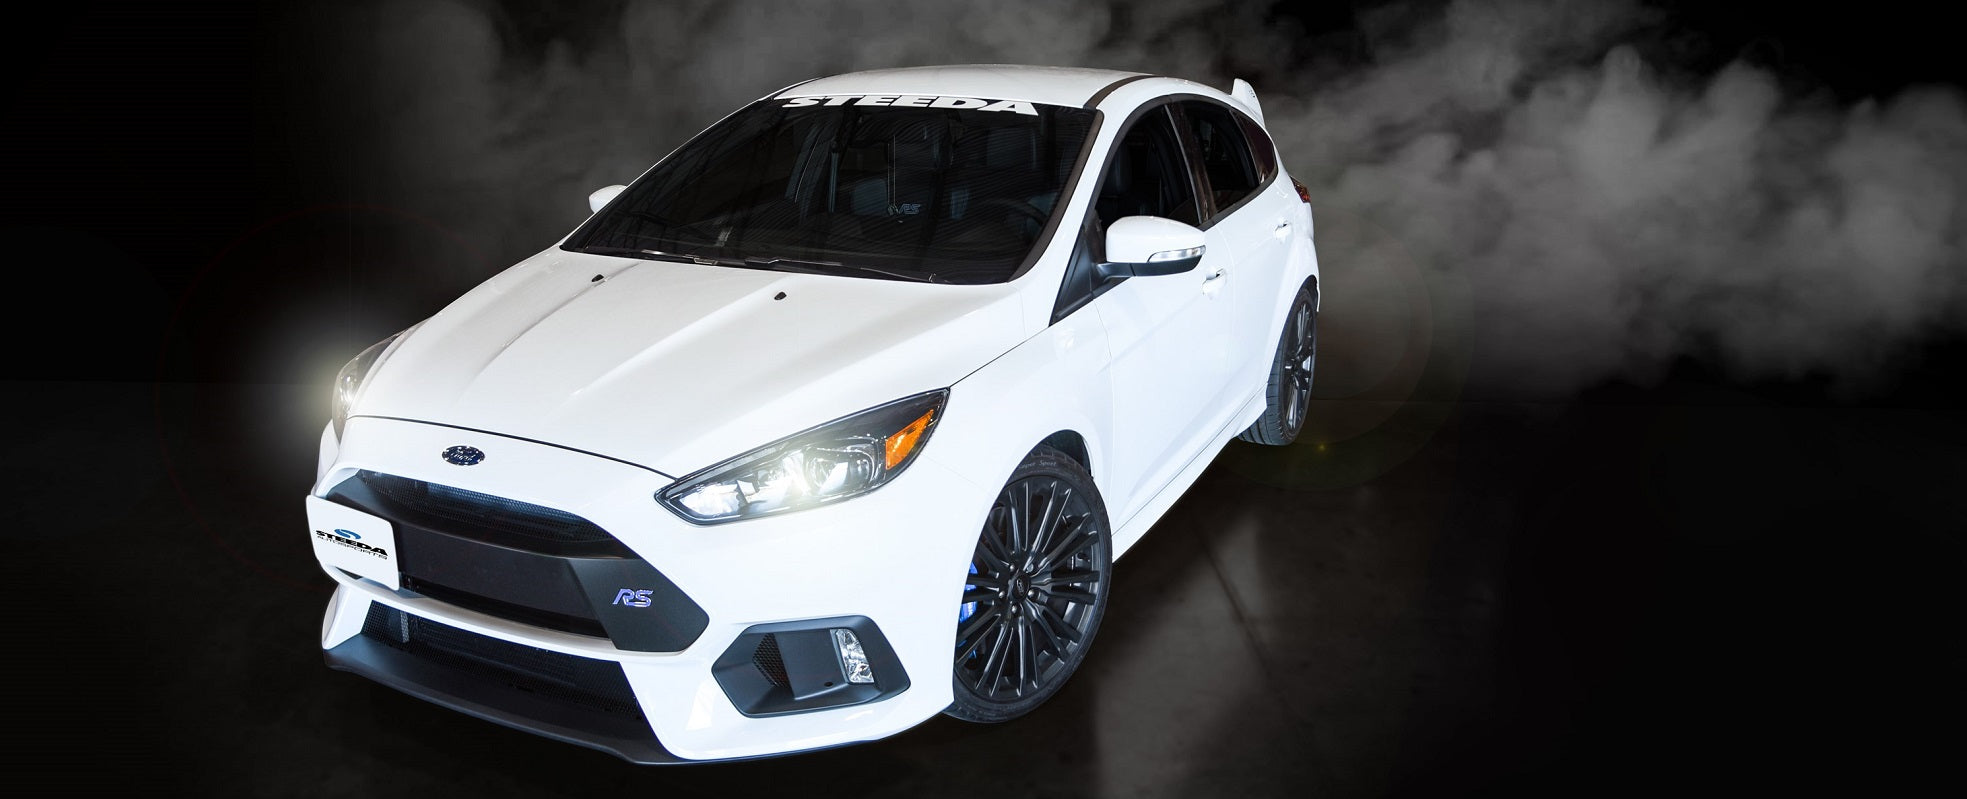 Ford Focus RS Mk1 Tuning Guide